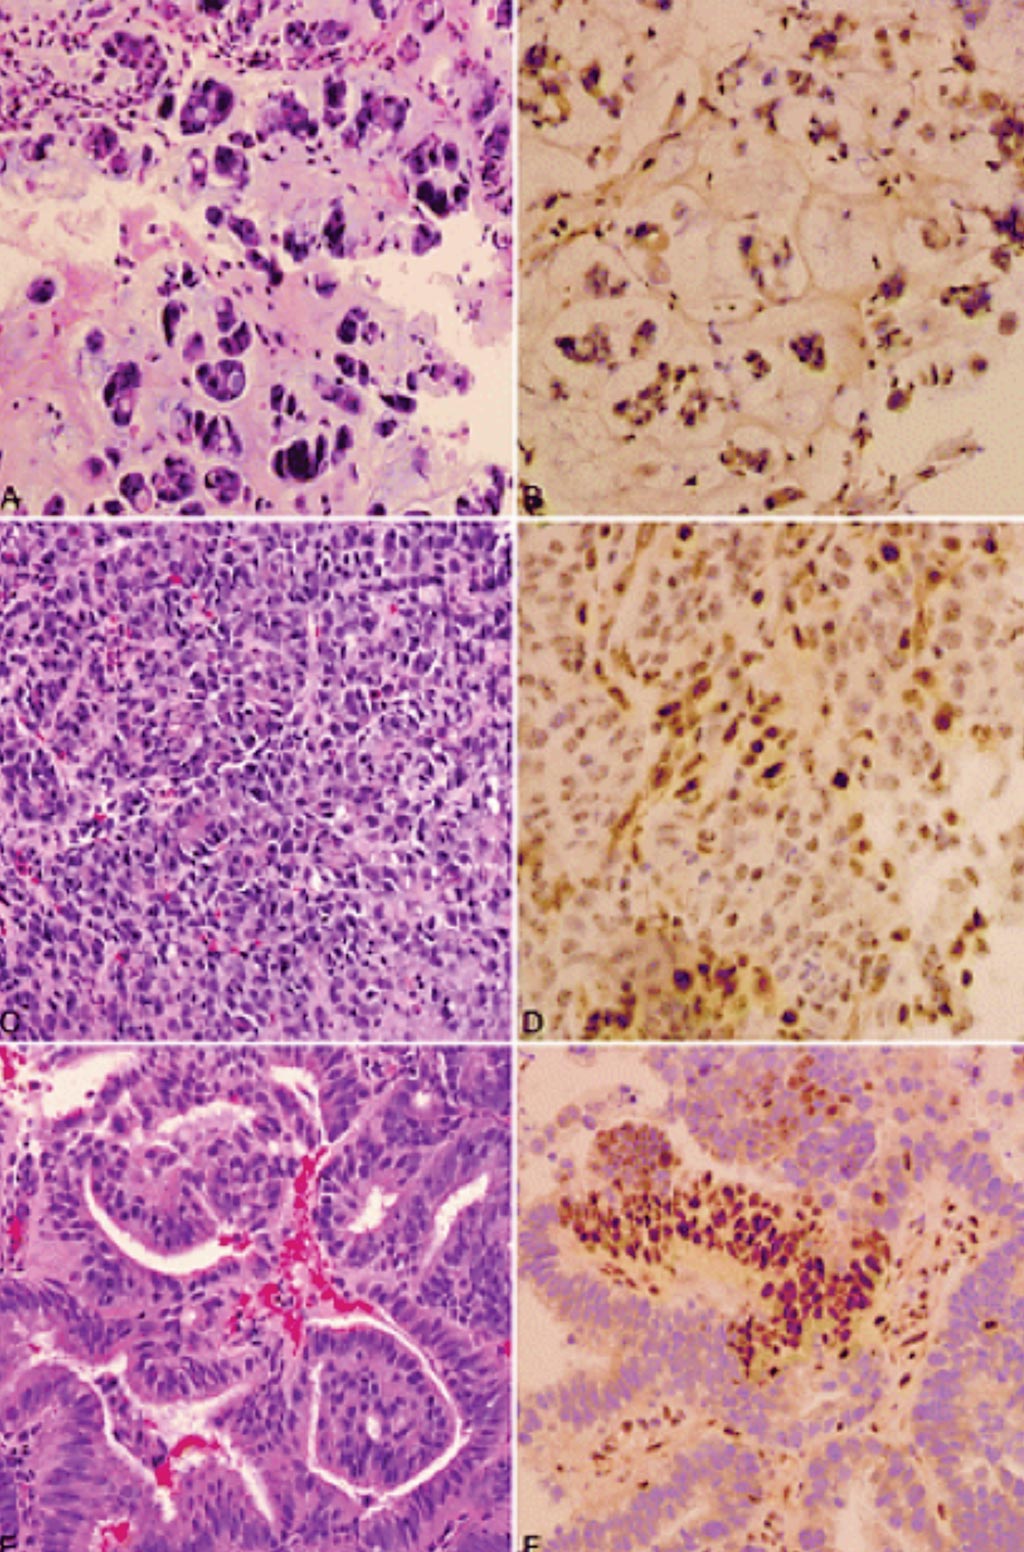 Image: A and B, Mucinous adenocarcinoma of colon and indeterminate PMS2 immunohistochemistry staining. C and D, Poorly differentiated carcinoma of colon and indeterminate MLH1 staining. E and F, Endometrial carcinoma and focal MSH6 staining (Photo courtesy of University of Texas Southwestern Medical Center).